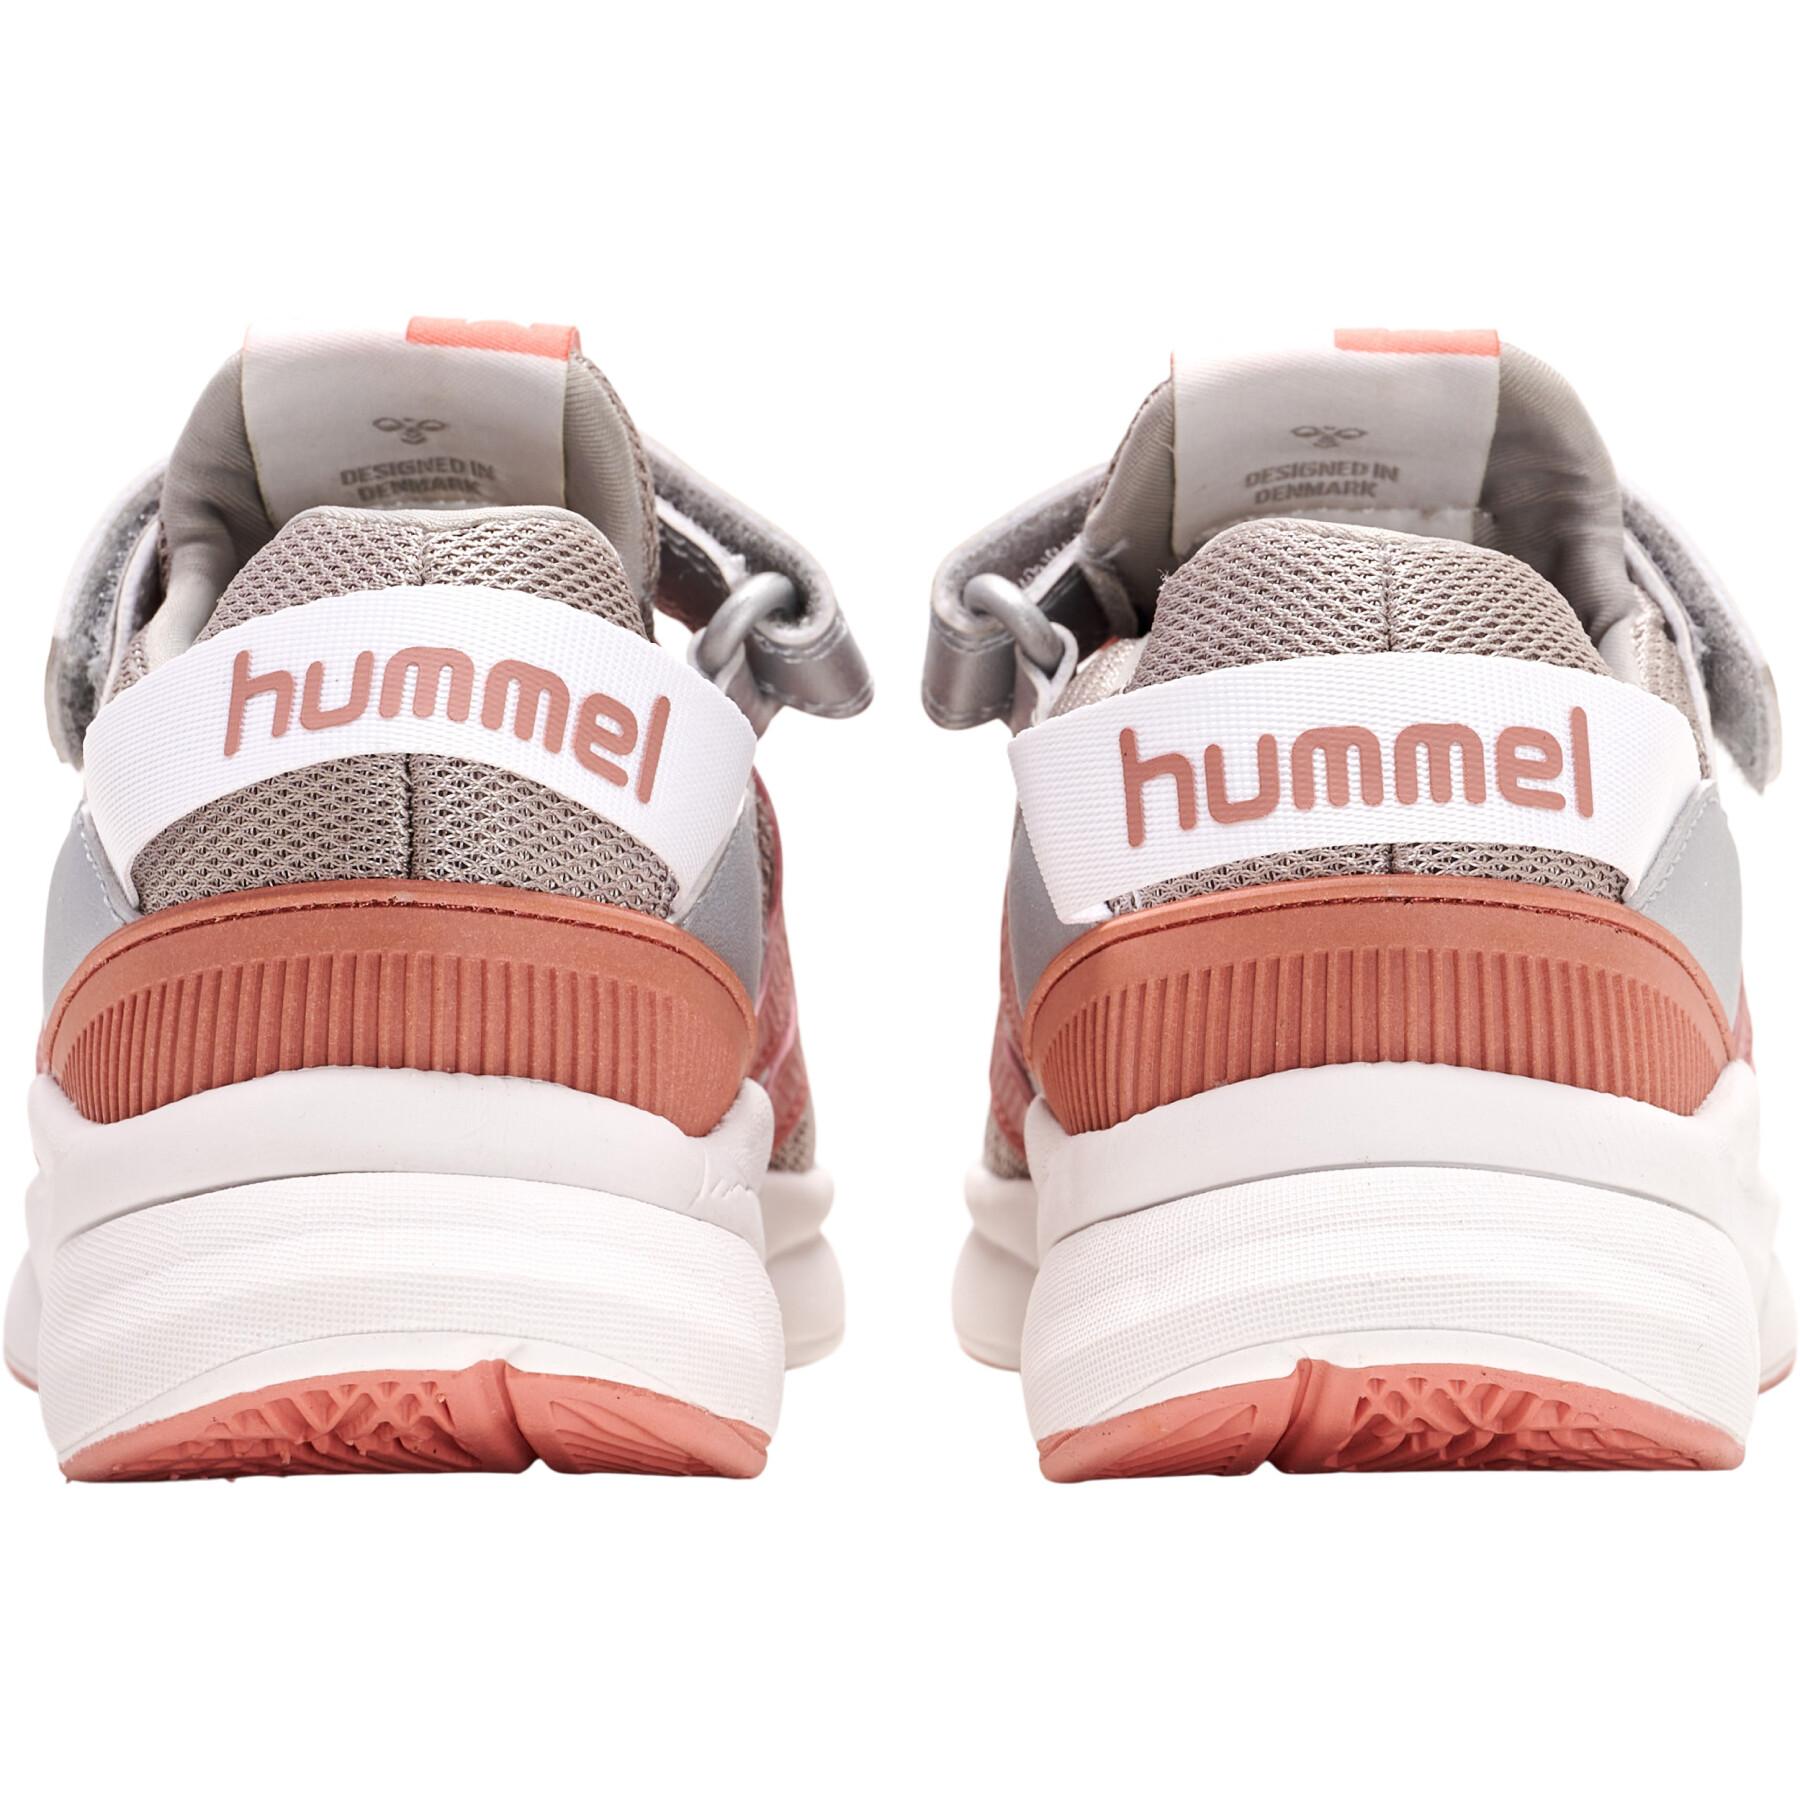 Recycled sneakers for kids Hummel Reach 300